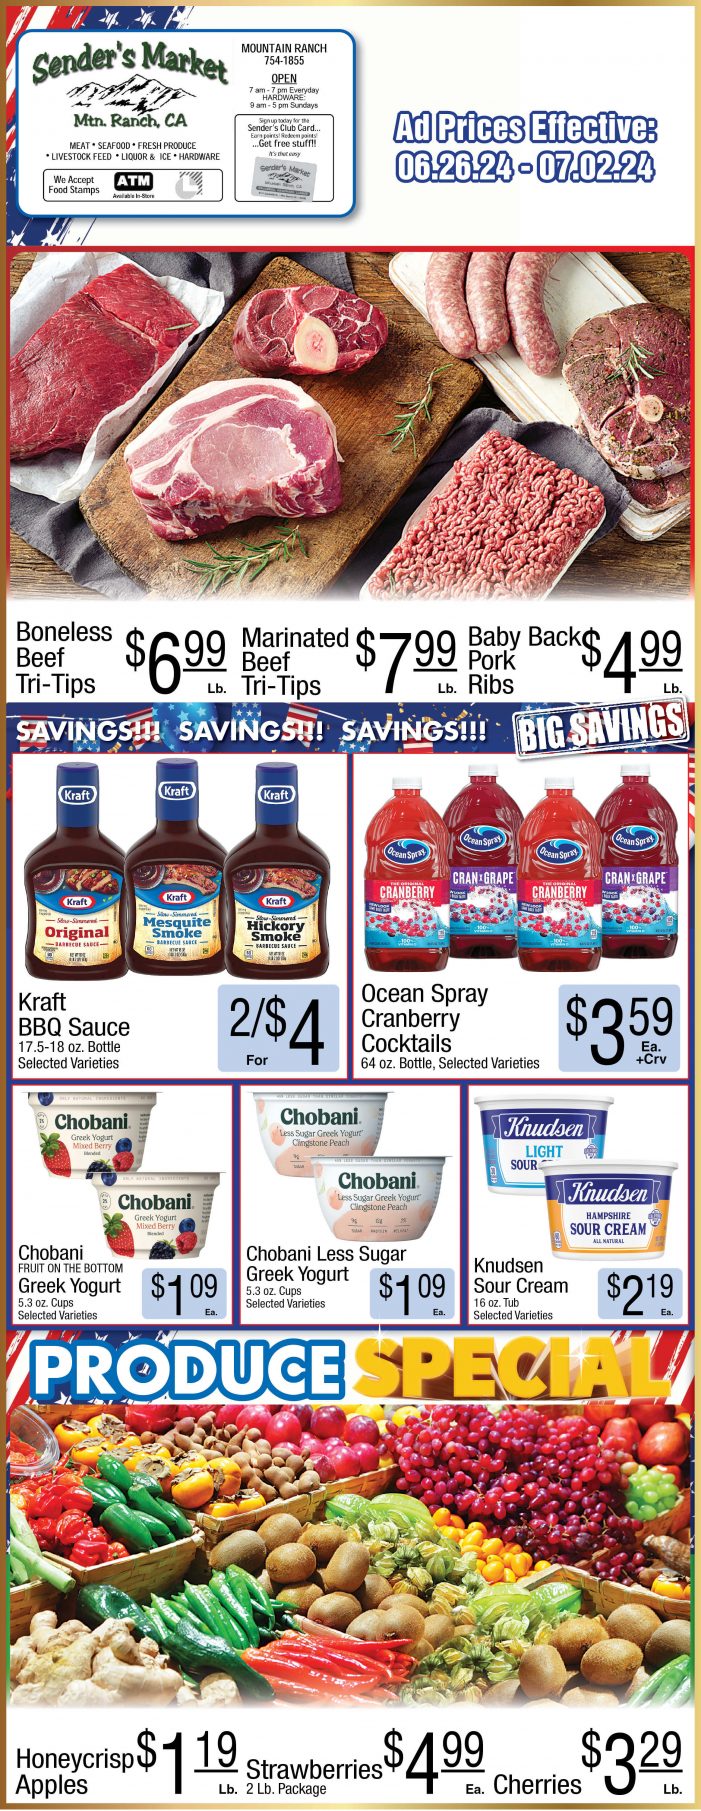 Sender’s Market Weekly Ad & Grocery Specials Through July 2nd! Shop Local & Save!!